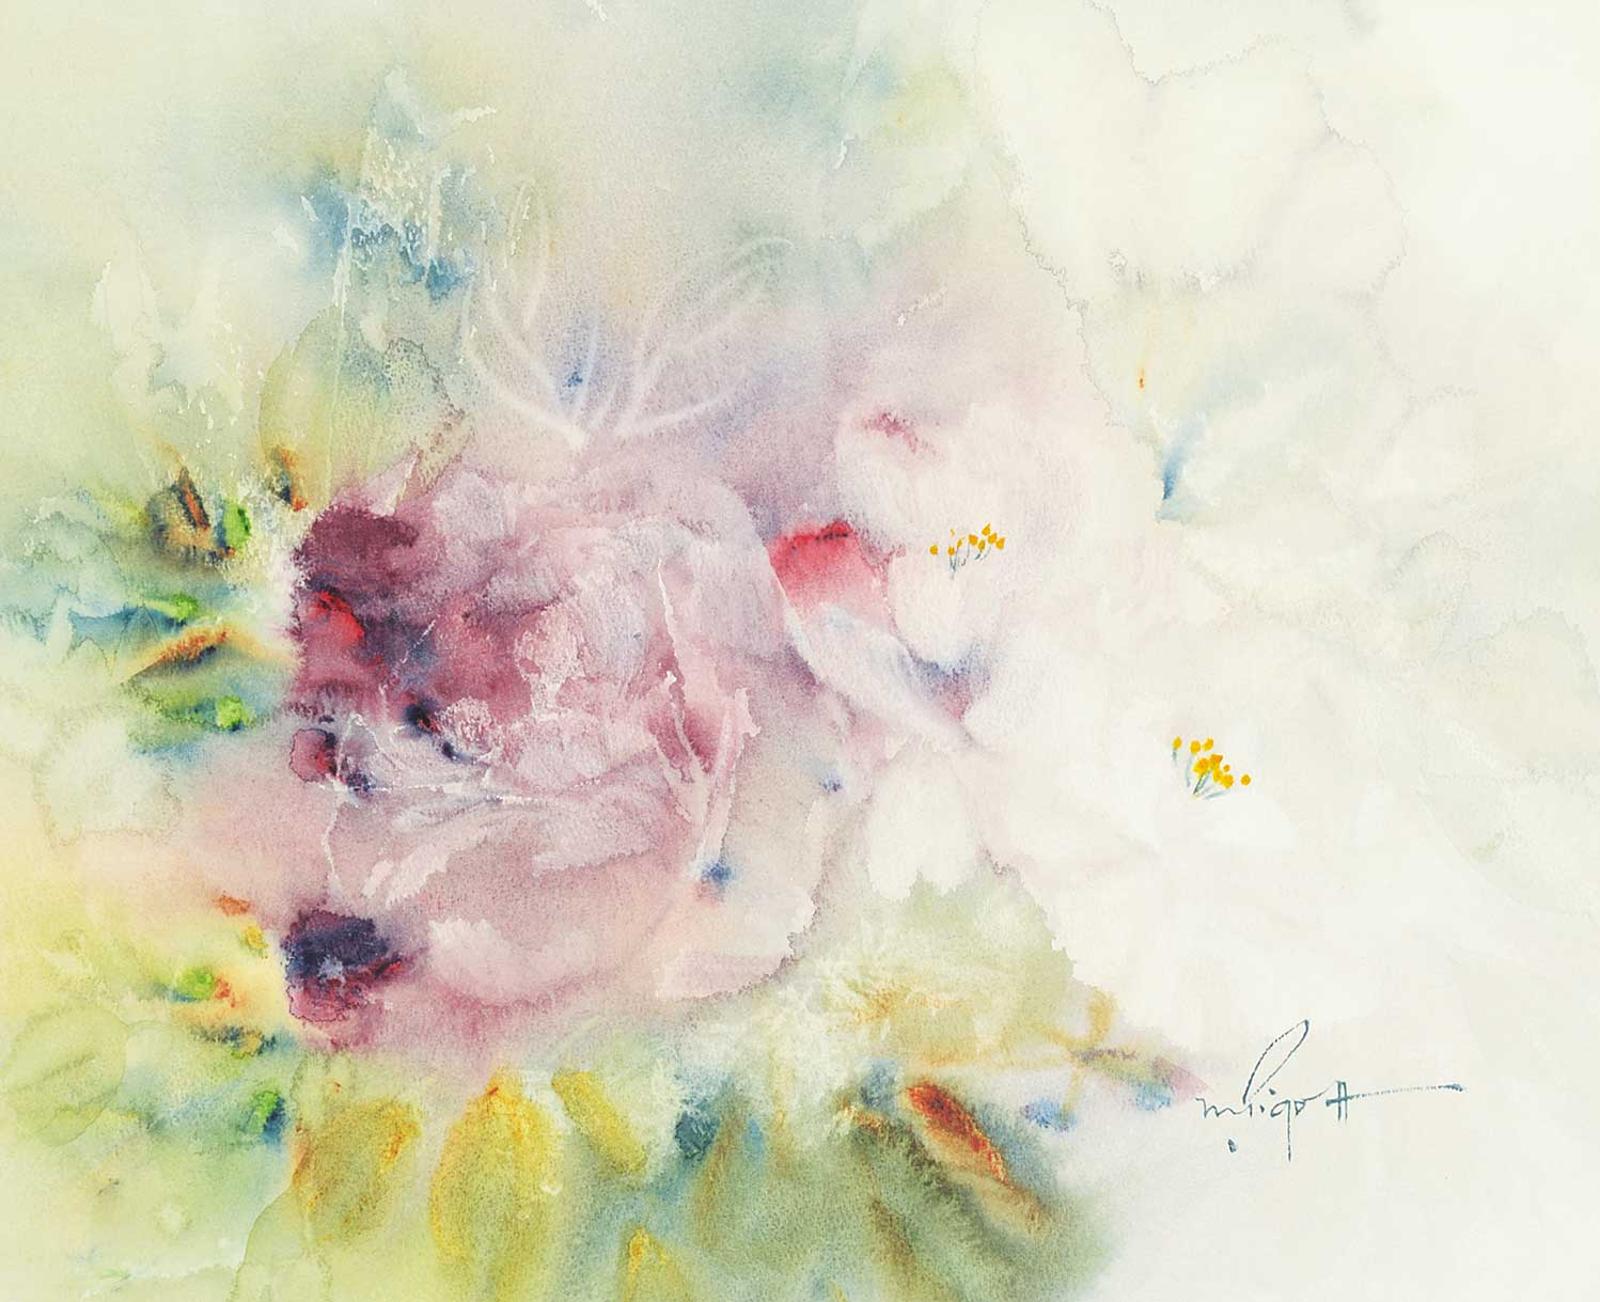 Marjorie Pigott (1904-1990) - Untitled - Floral Abstract